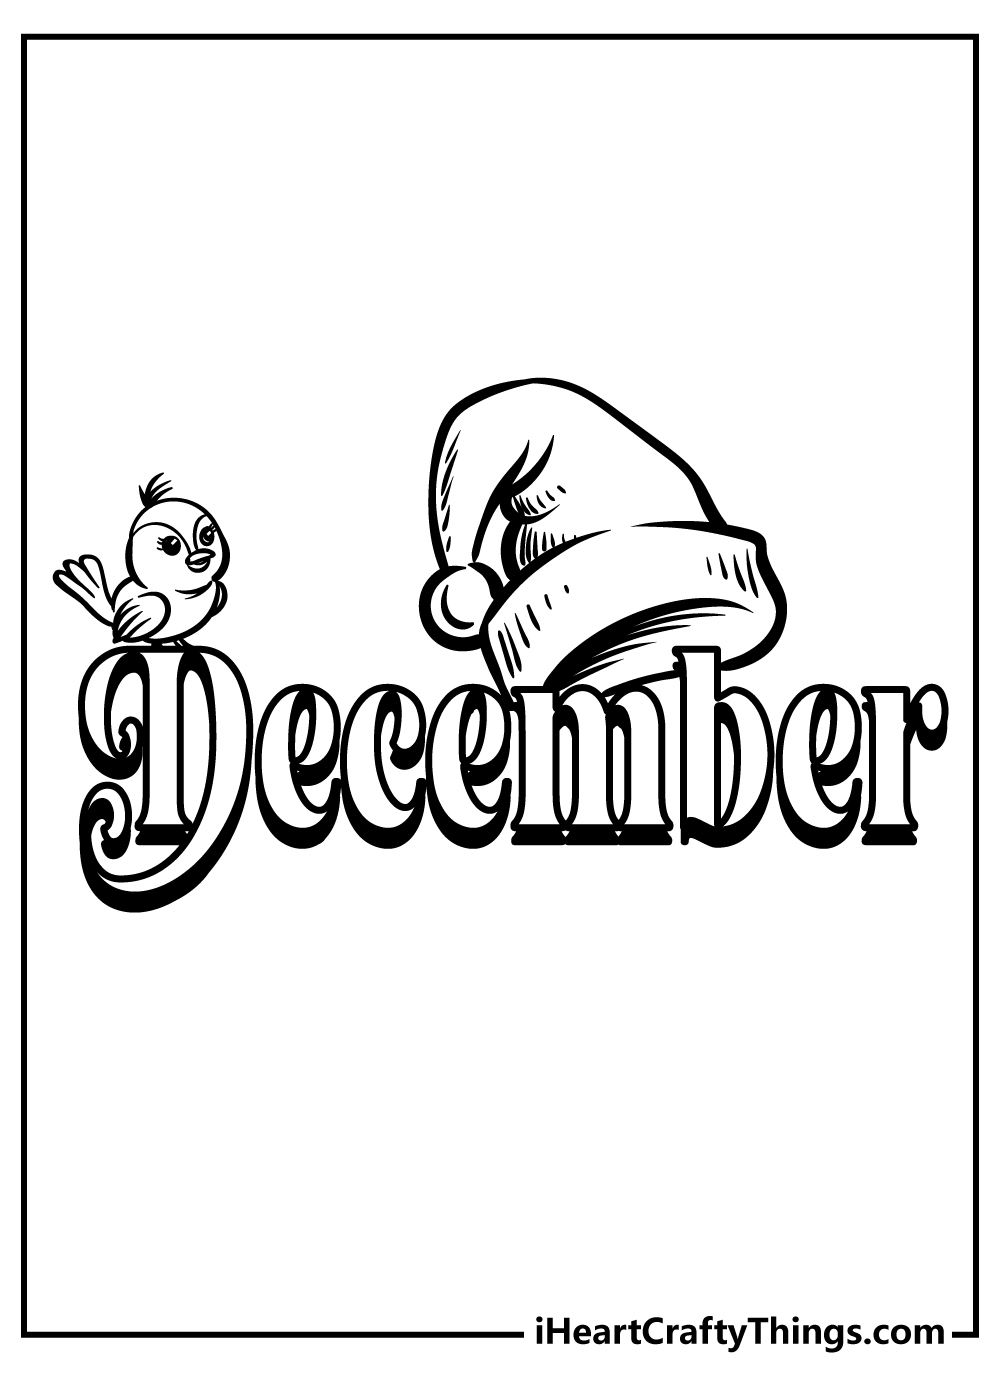 December Coloring Pages for adults free printable